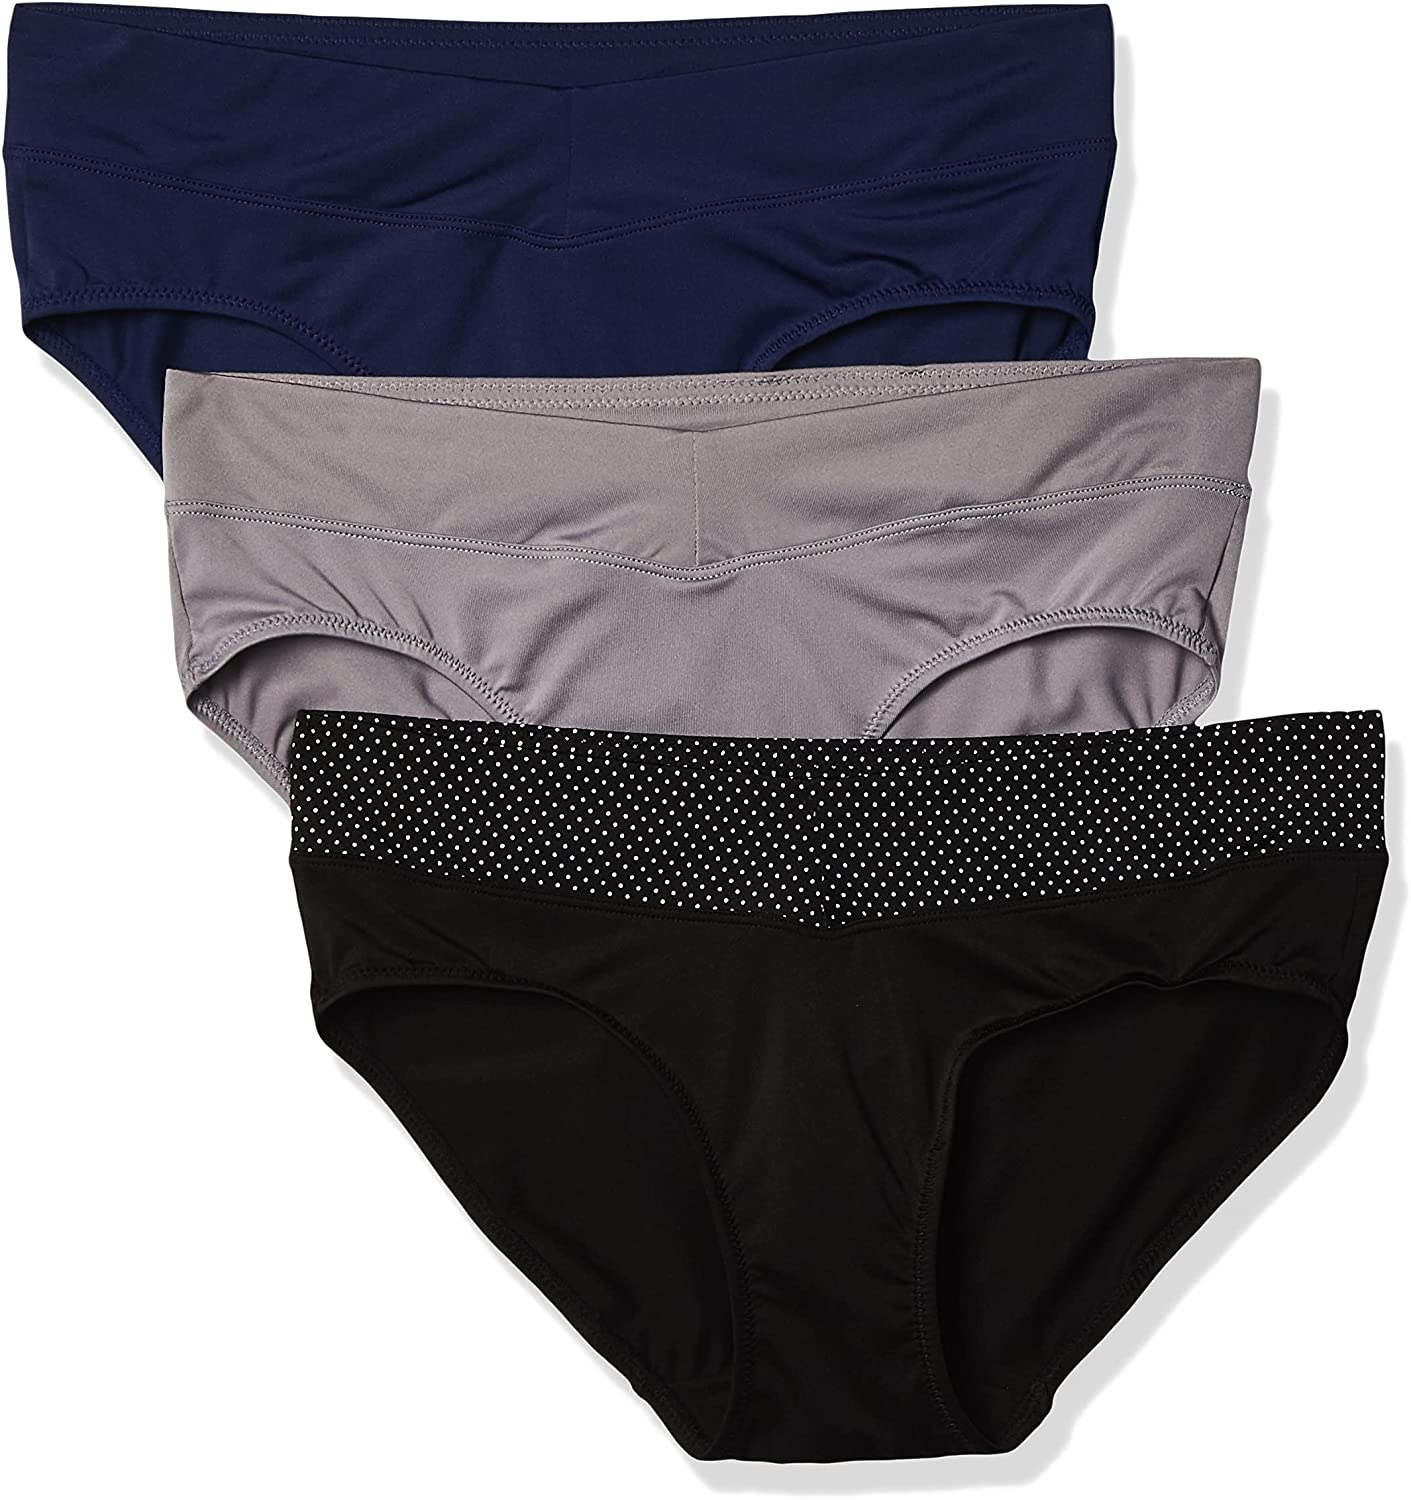 Warner's Women's Blissful Benefits No Muffin Top 3 Pack Hipster